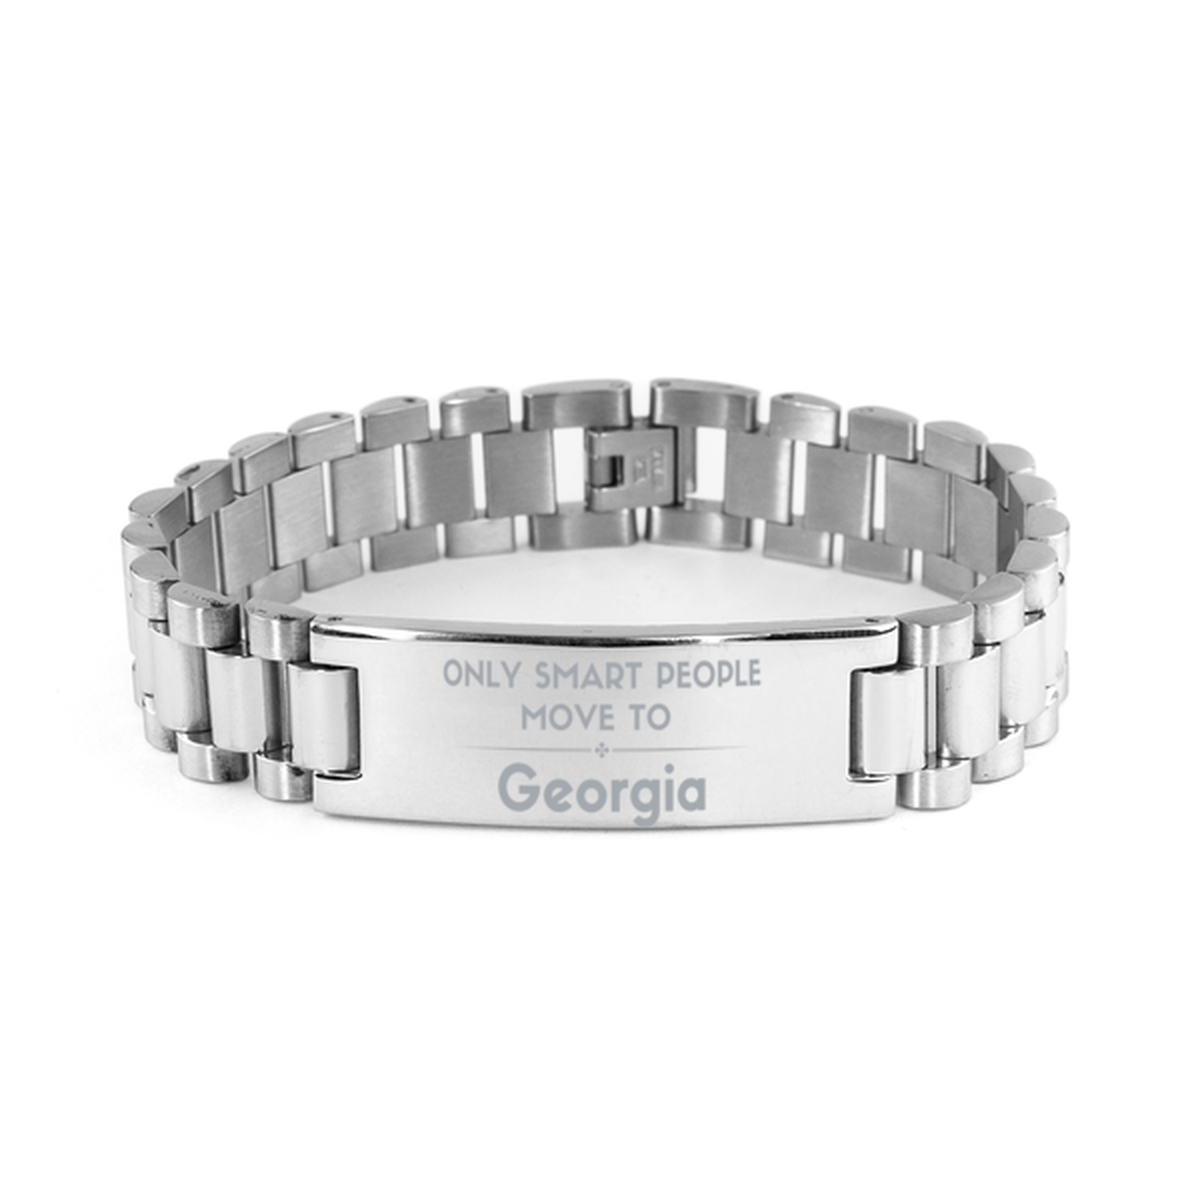 Only smart people move to Georgia Ladder Stainless Steel Bracelet, Gag Gifts For Georgia, Move to Georgia Gifts for Friends Coworker Funny Saying Quote